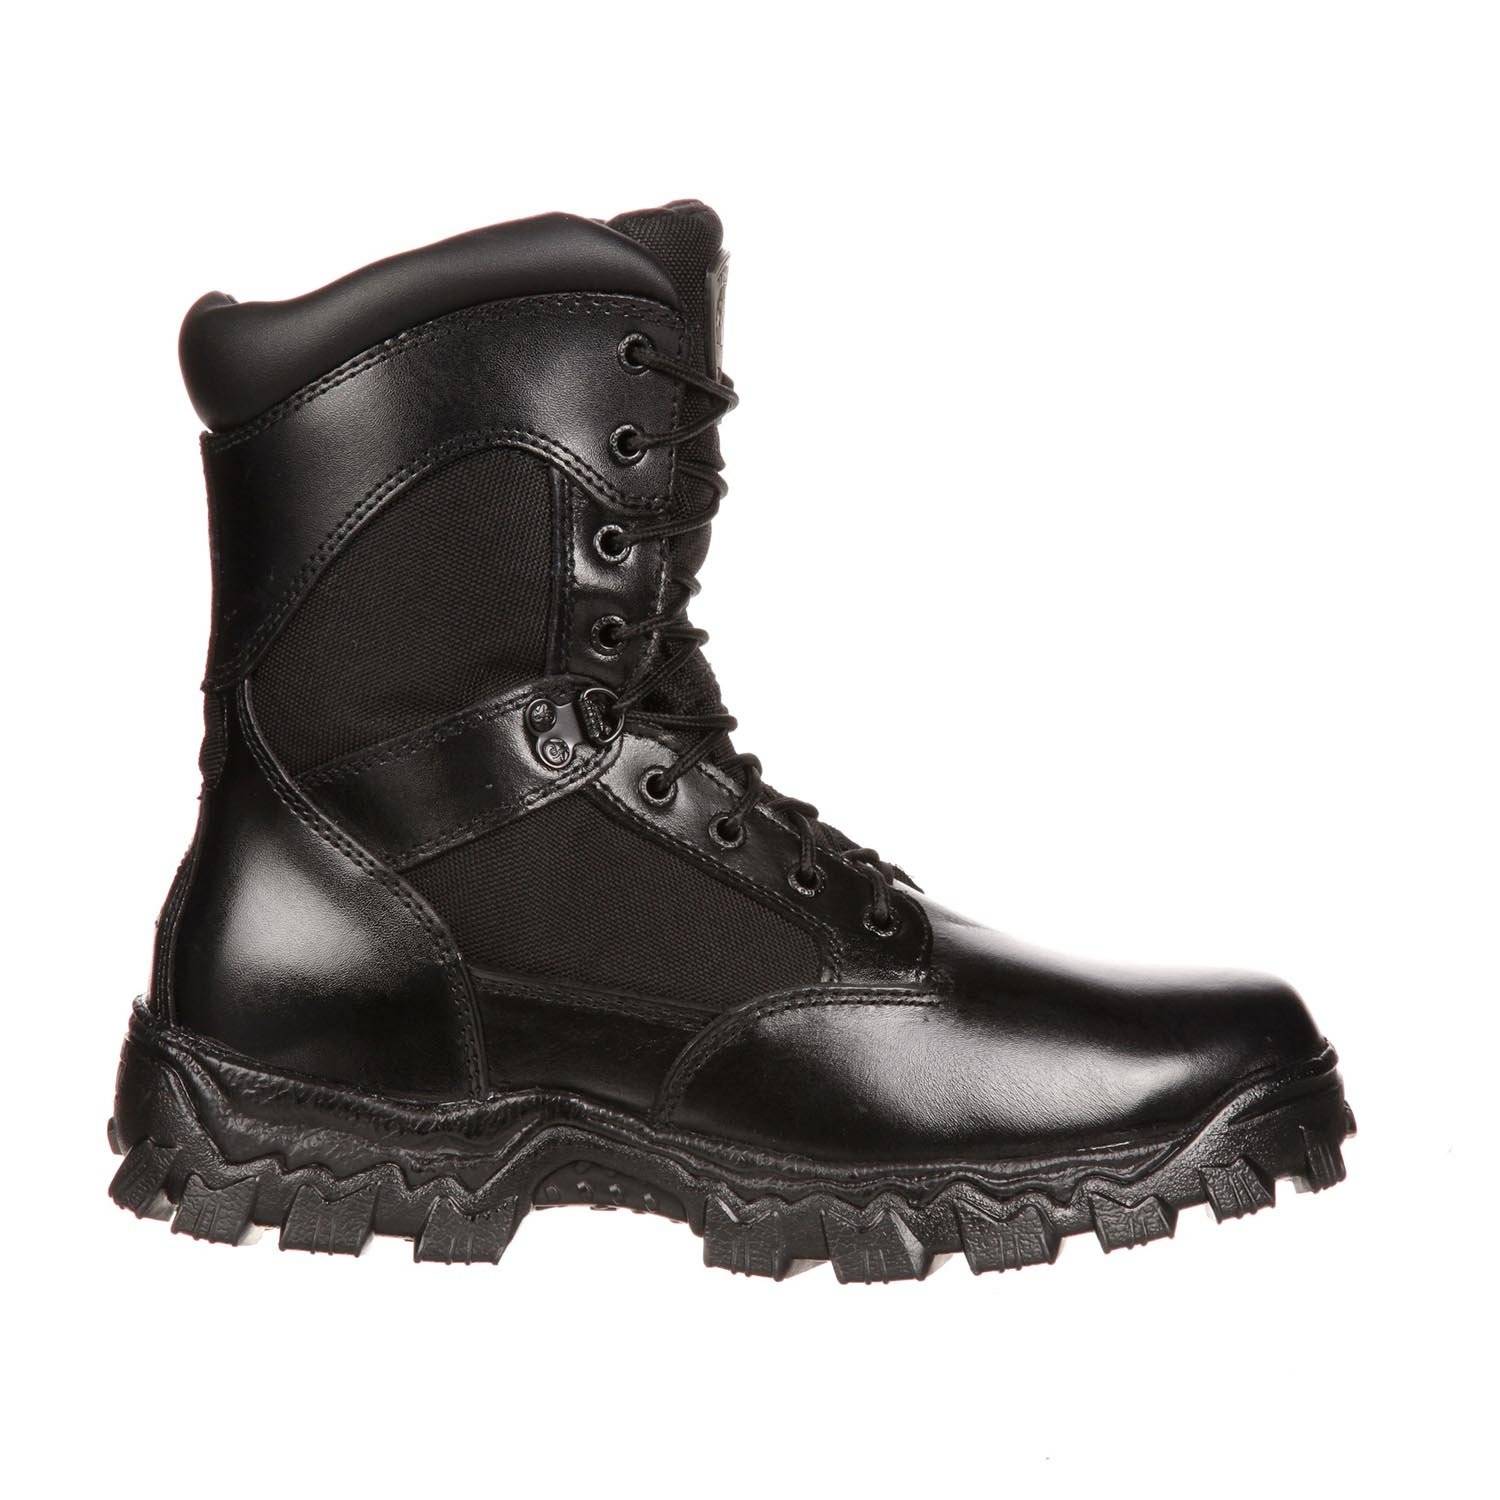 Rocky Alpha Force 8" Waterproof 400G Insulated Boots